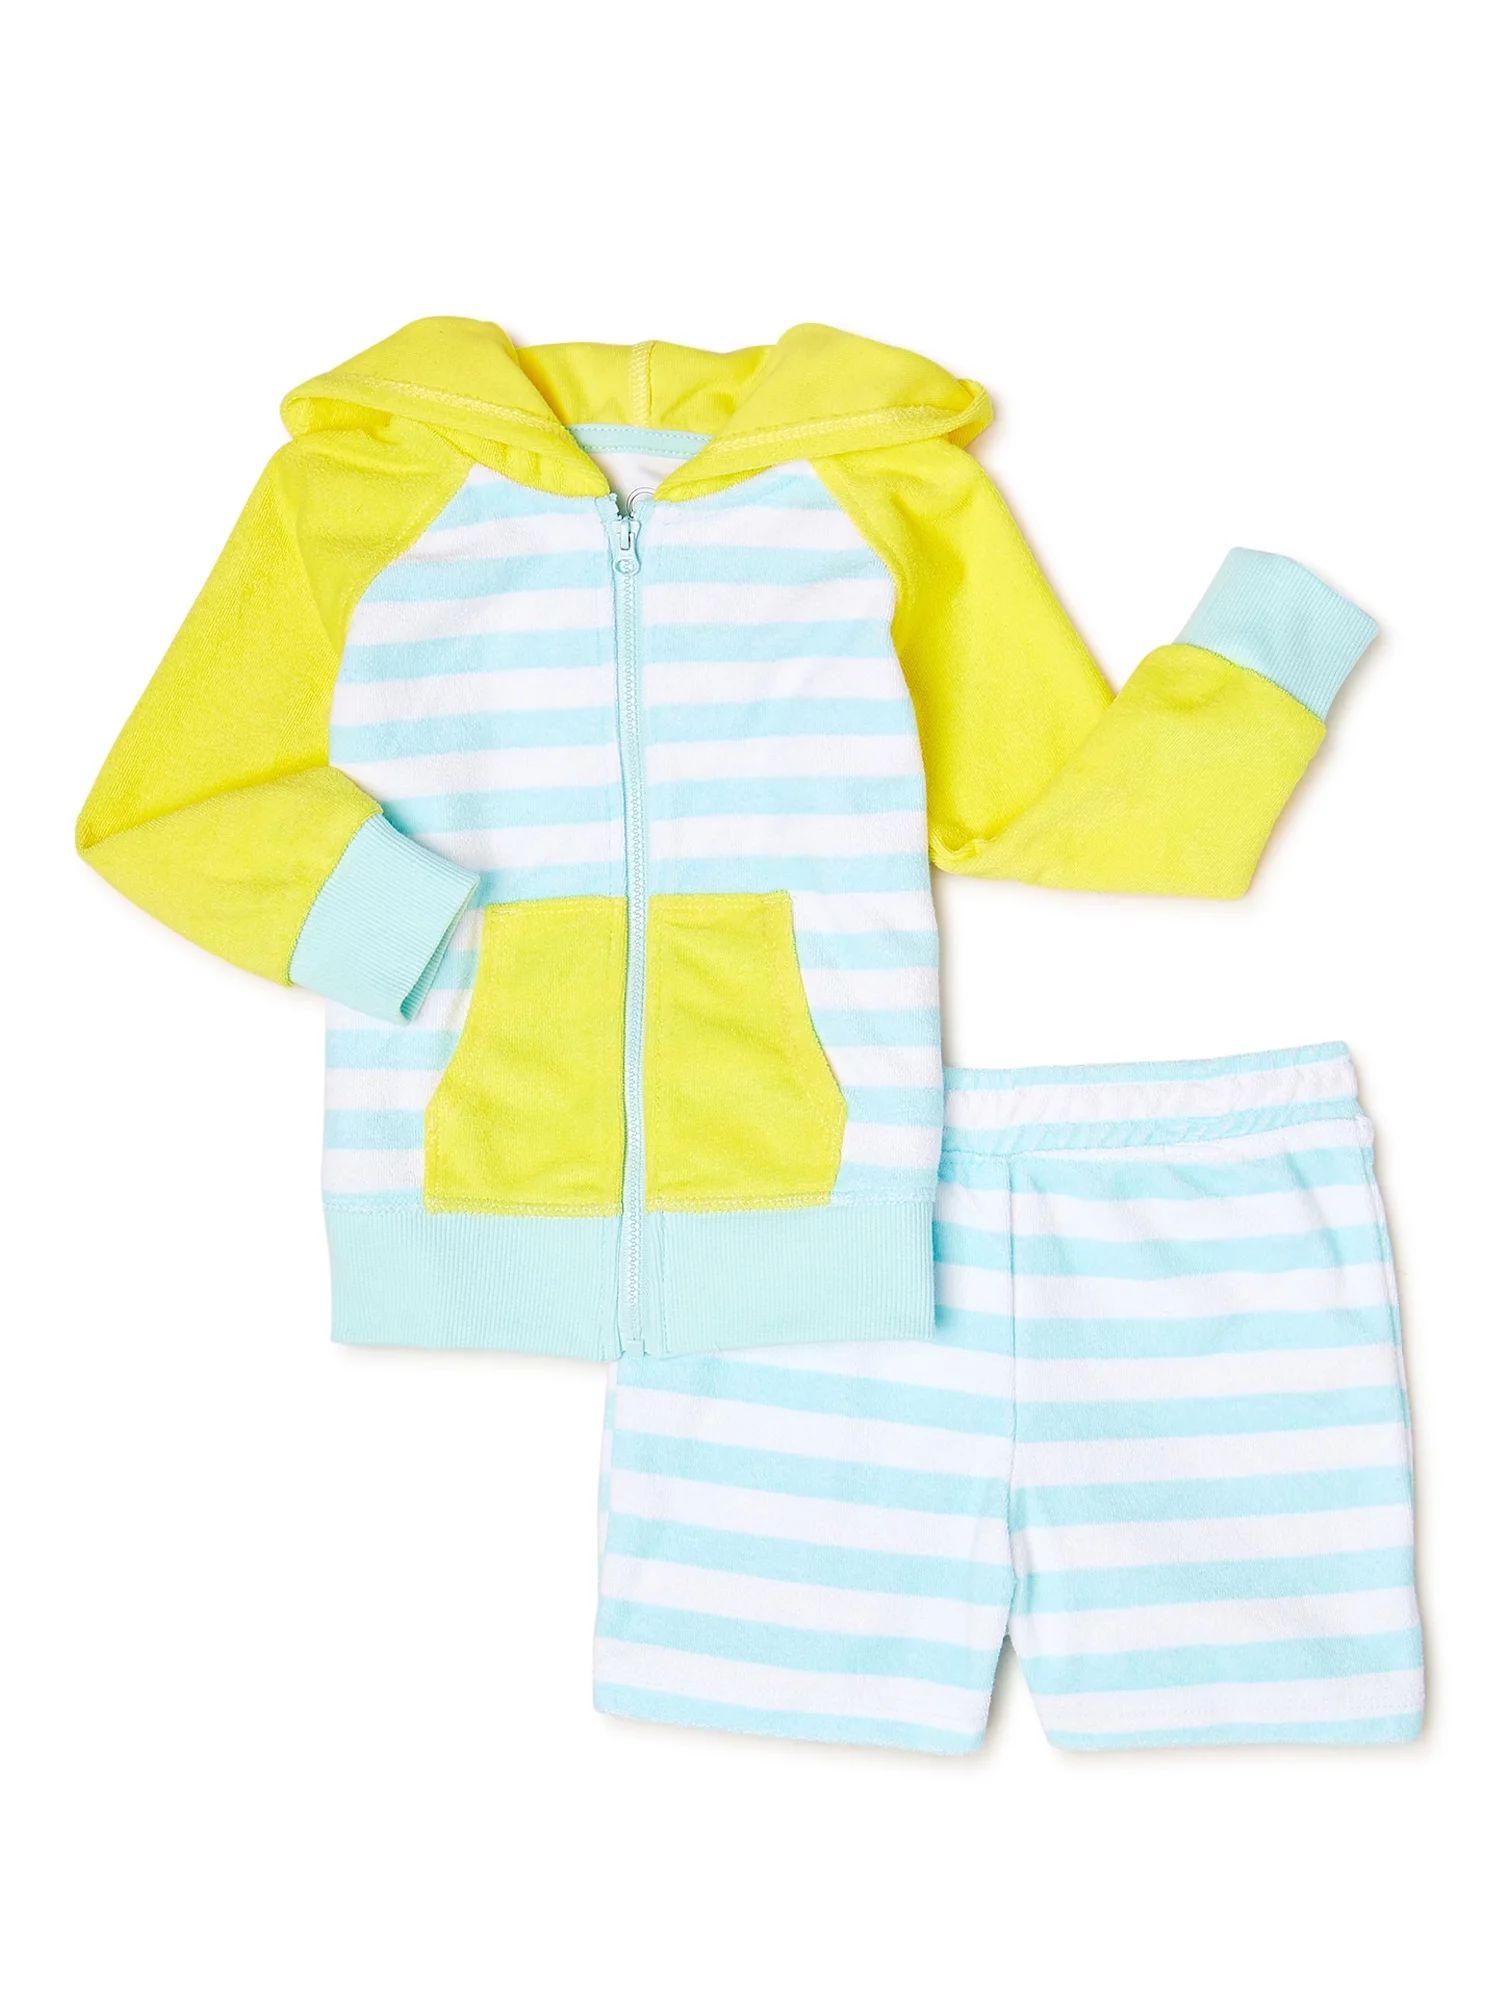 Wonder Nation Baby and Toddler French Terry Swim Cover Up, 2-Piece, Sizes 12M-5T | Walmart (US)